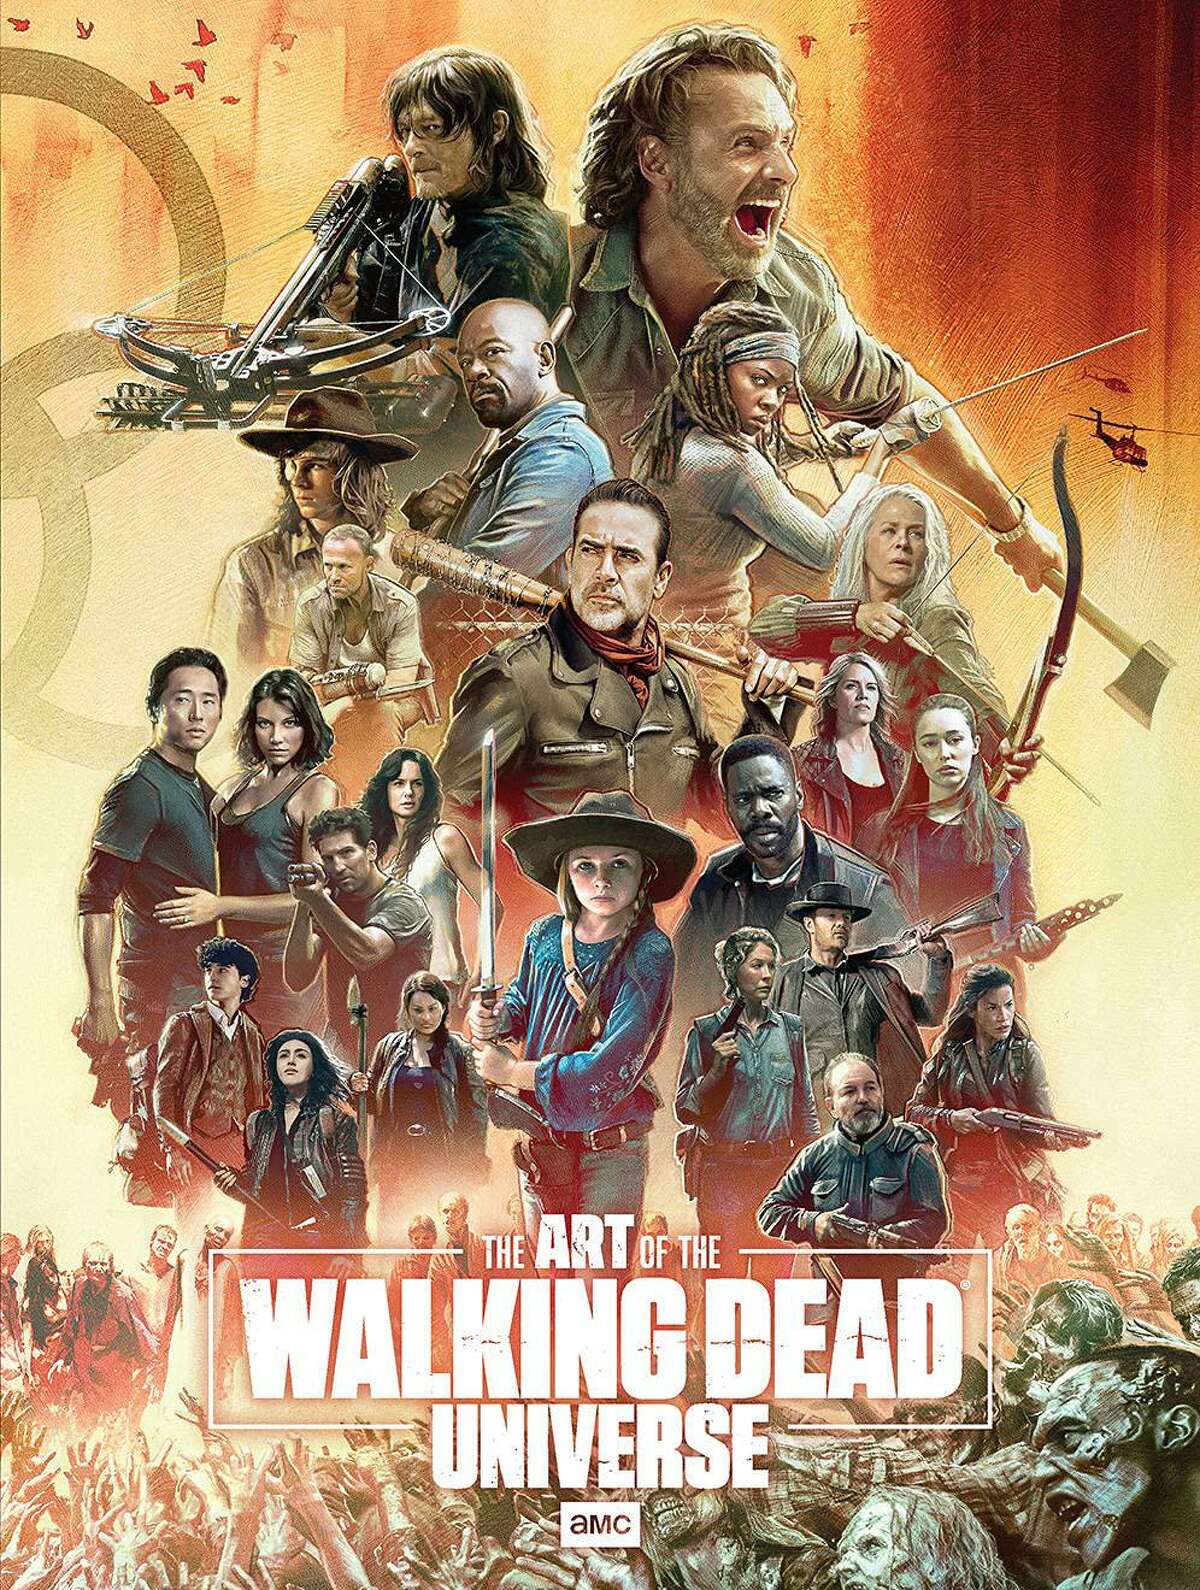 “The Art of the Walking Dead Universe”